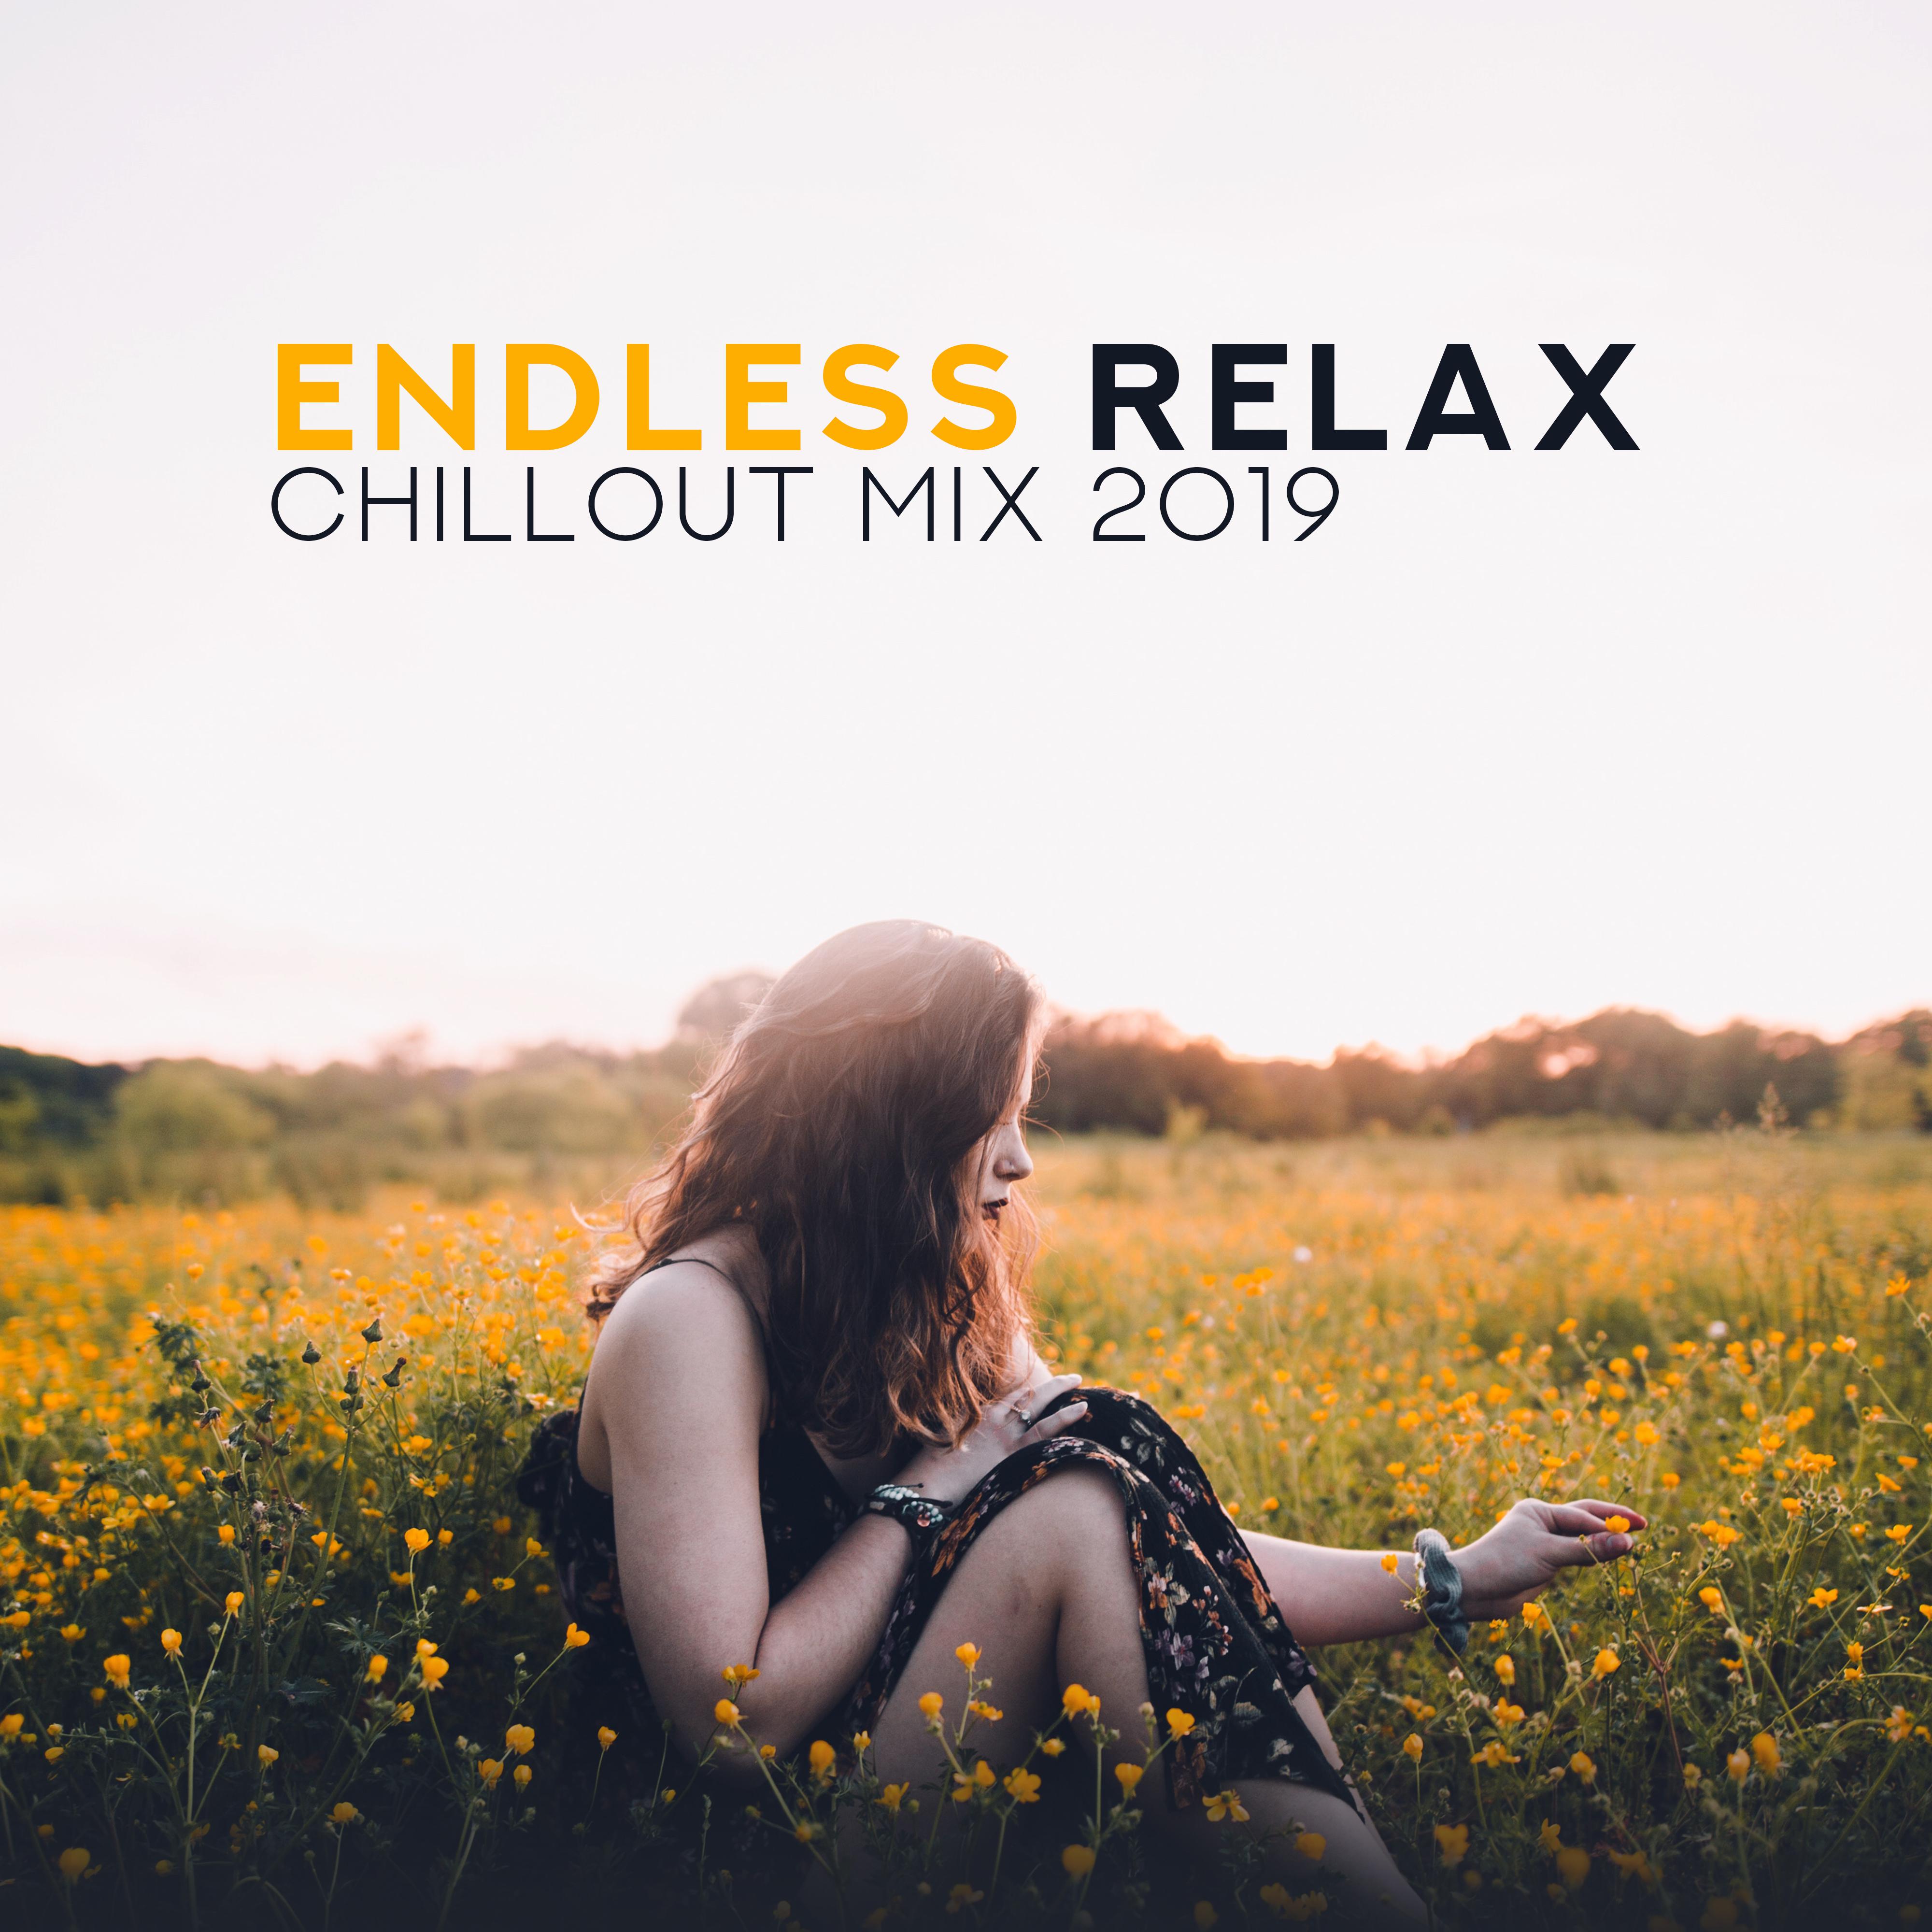 Endless Relax Chillout Mix 2019  Compilation of Best Chill Out Vibes for Total Rest  Relaxation, Calming Down, Stress Relief Beats